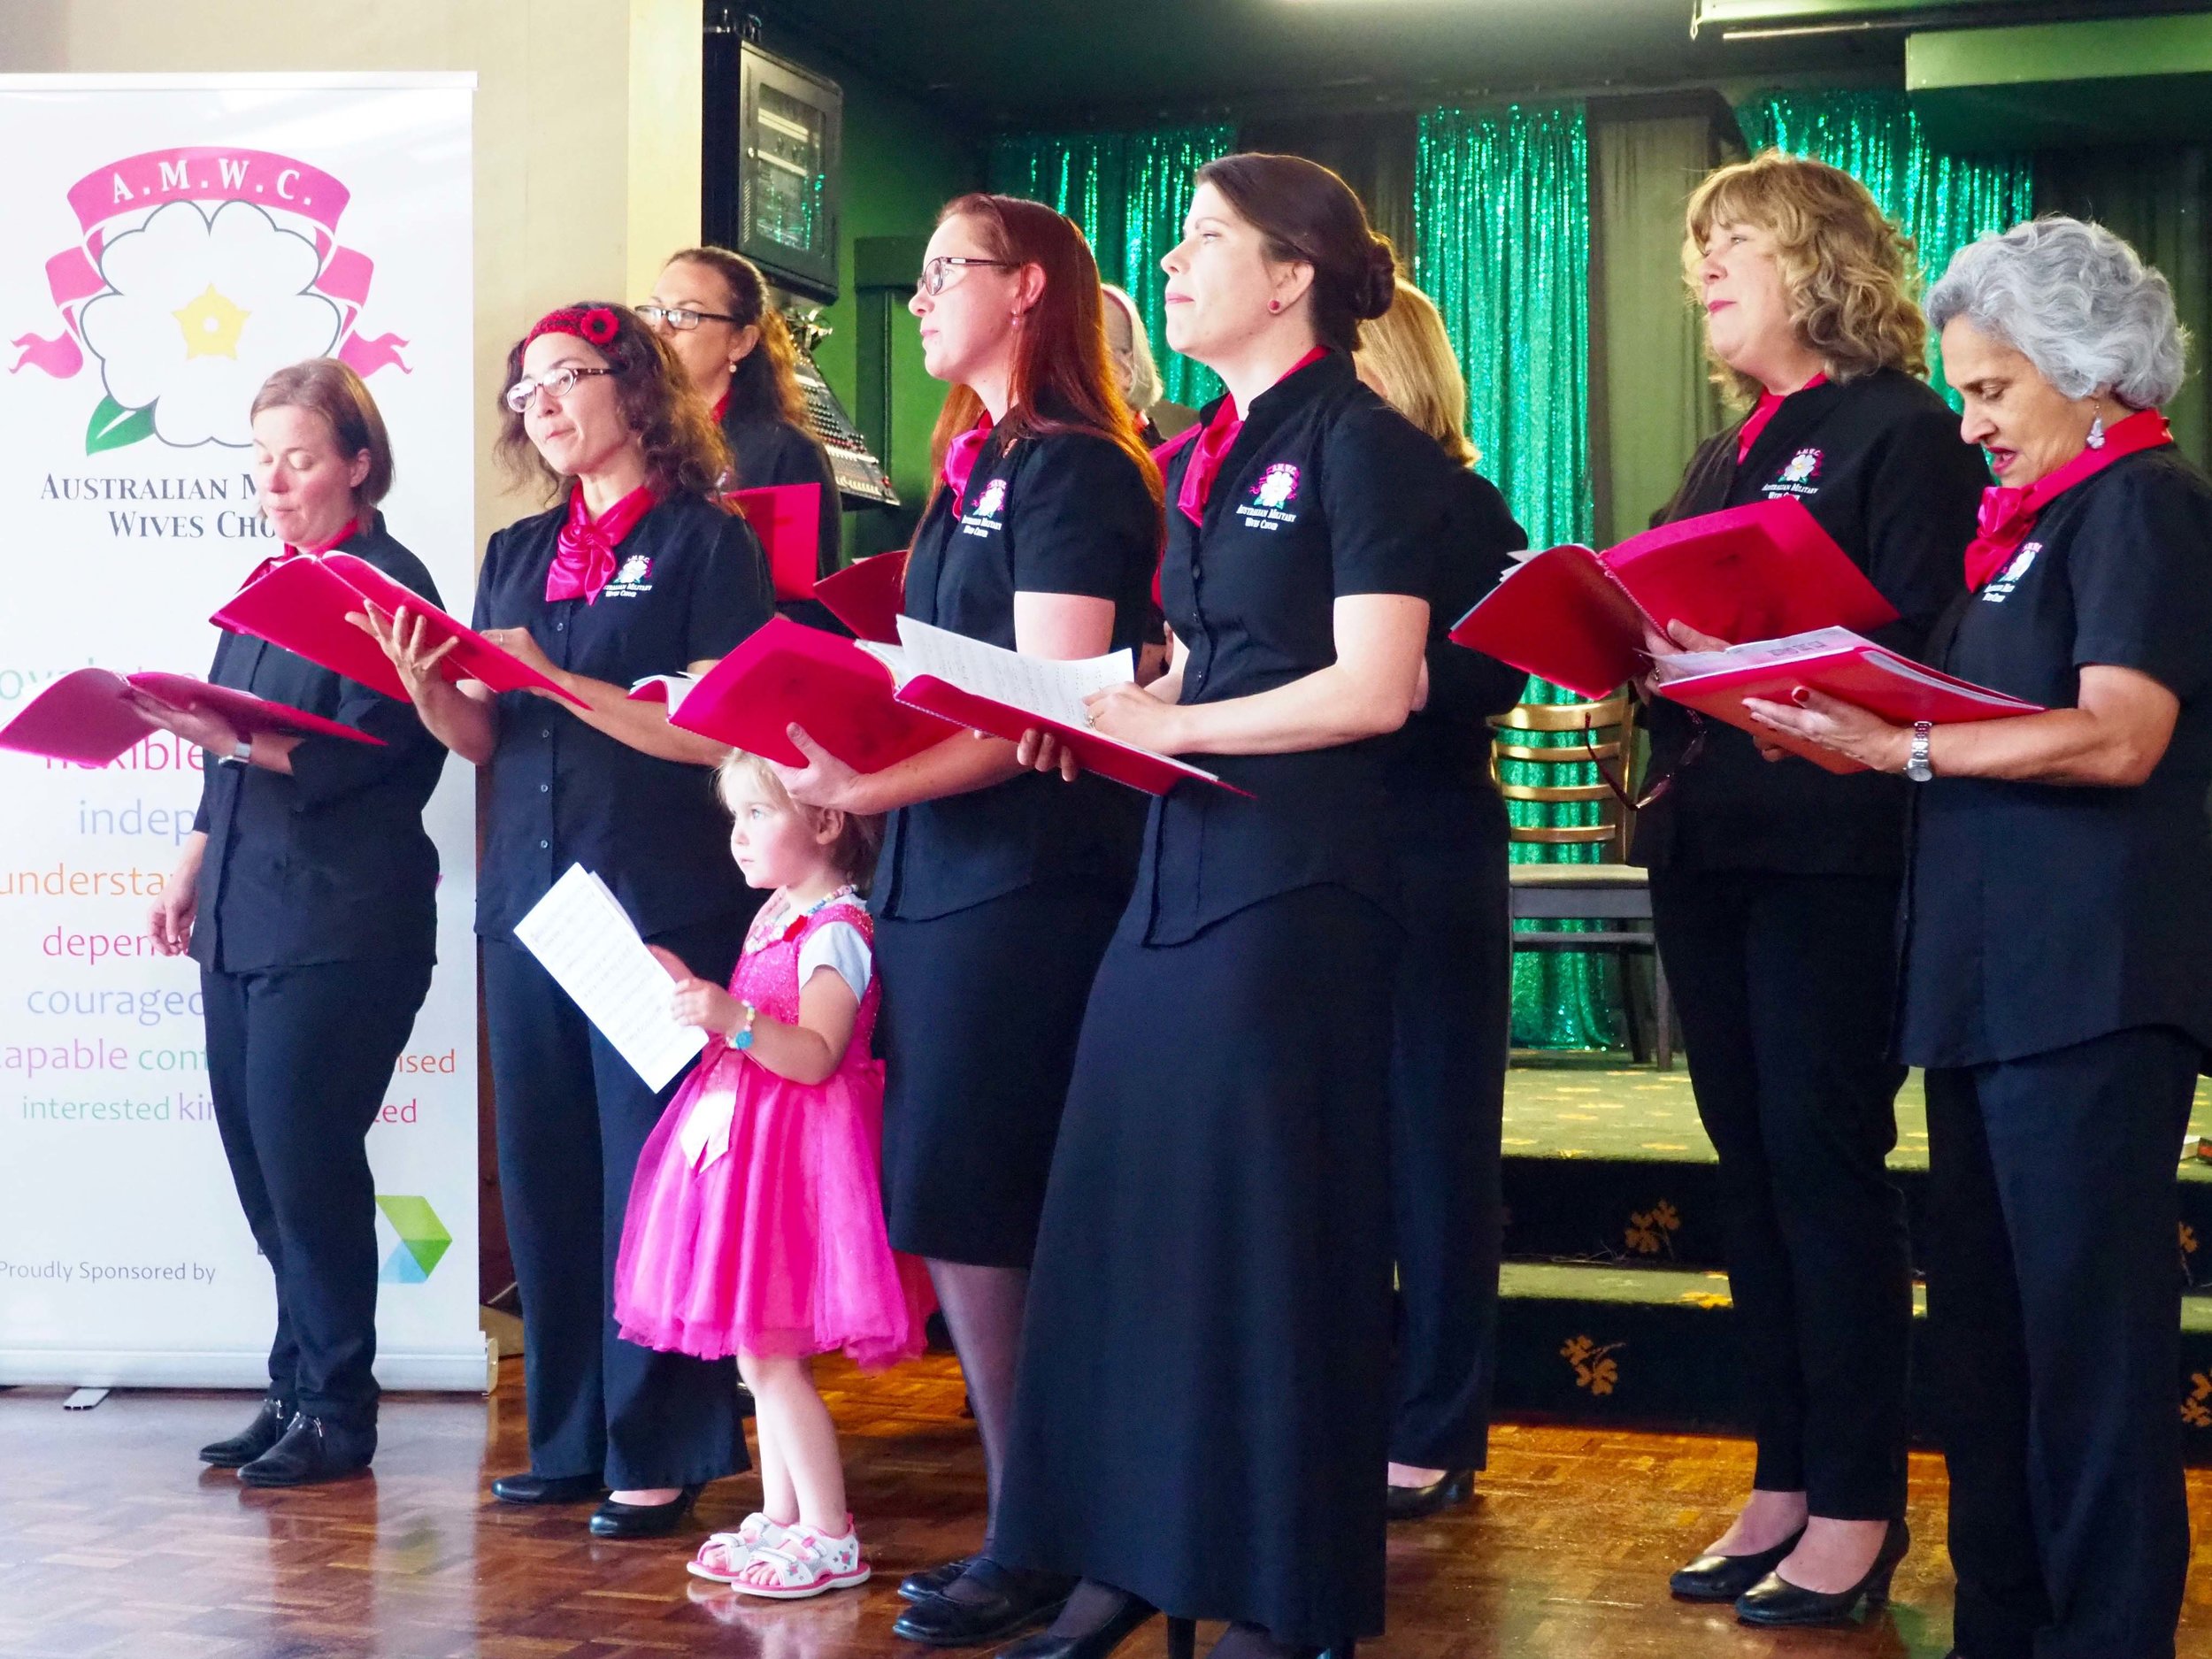 AMWC Canberra are very proud to sing for the Edison Day Club entertaining veterans and war widows.